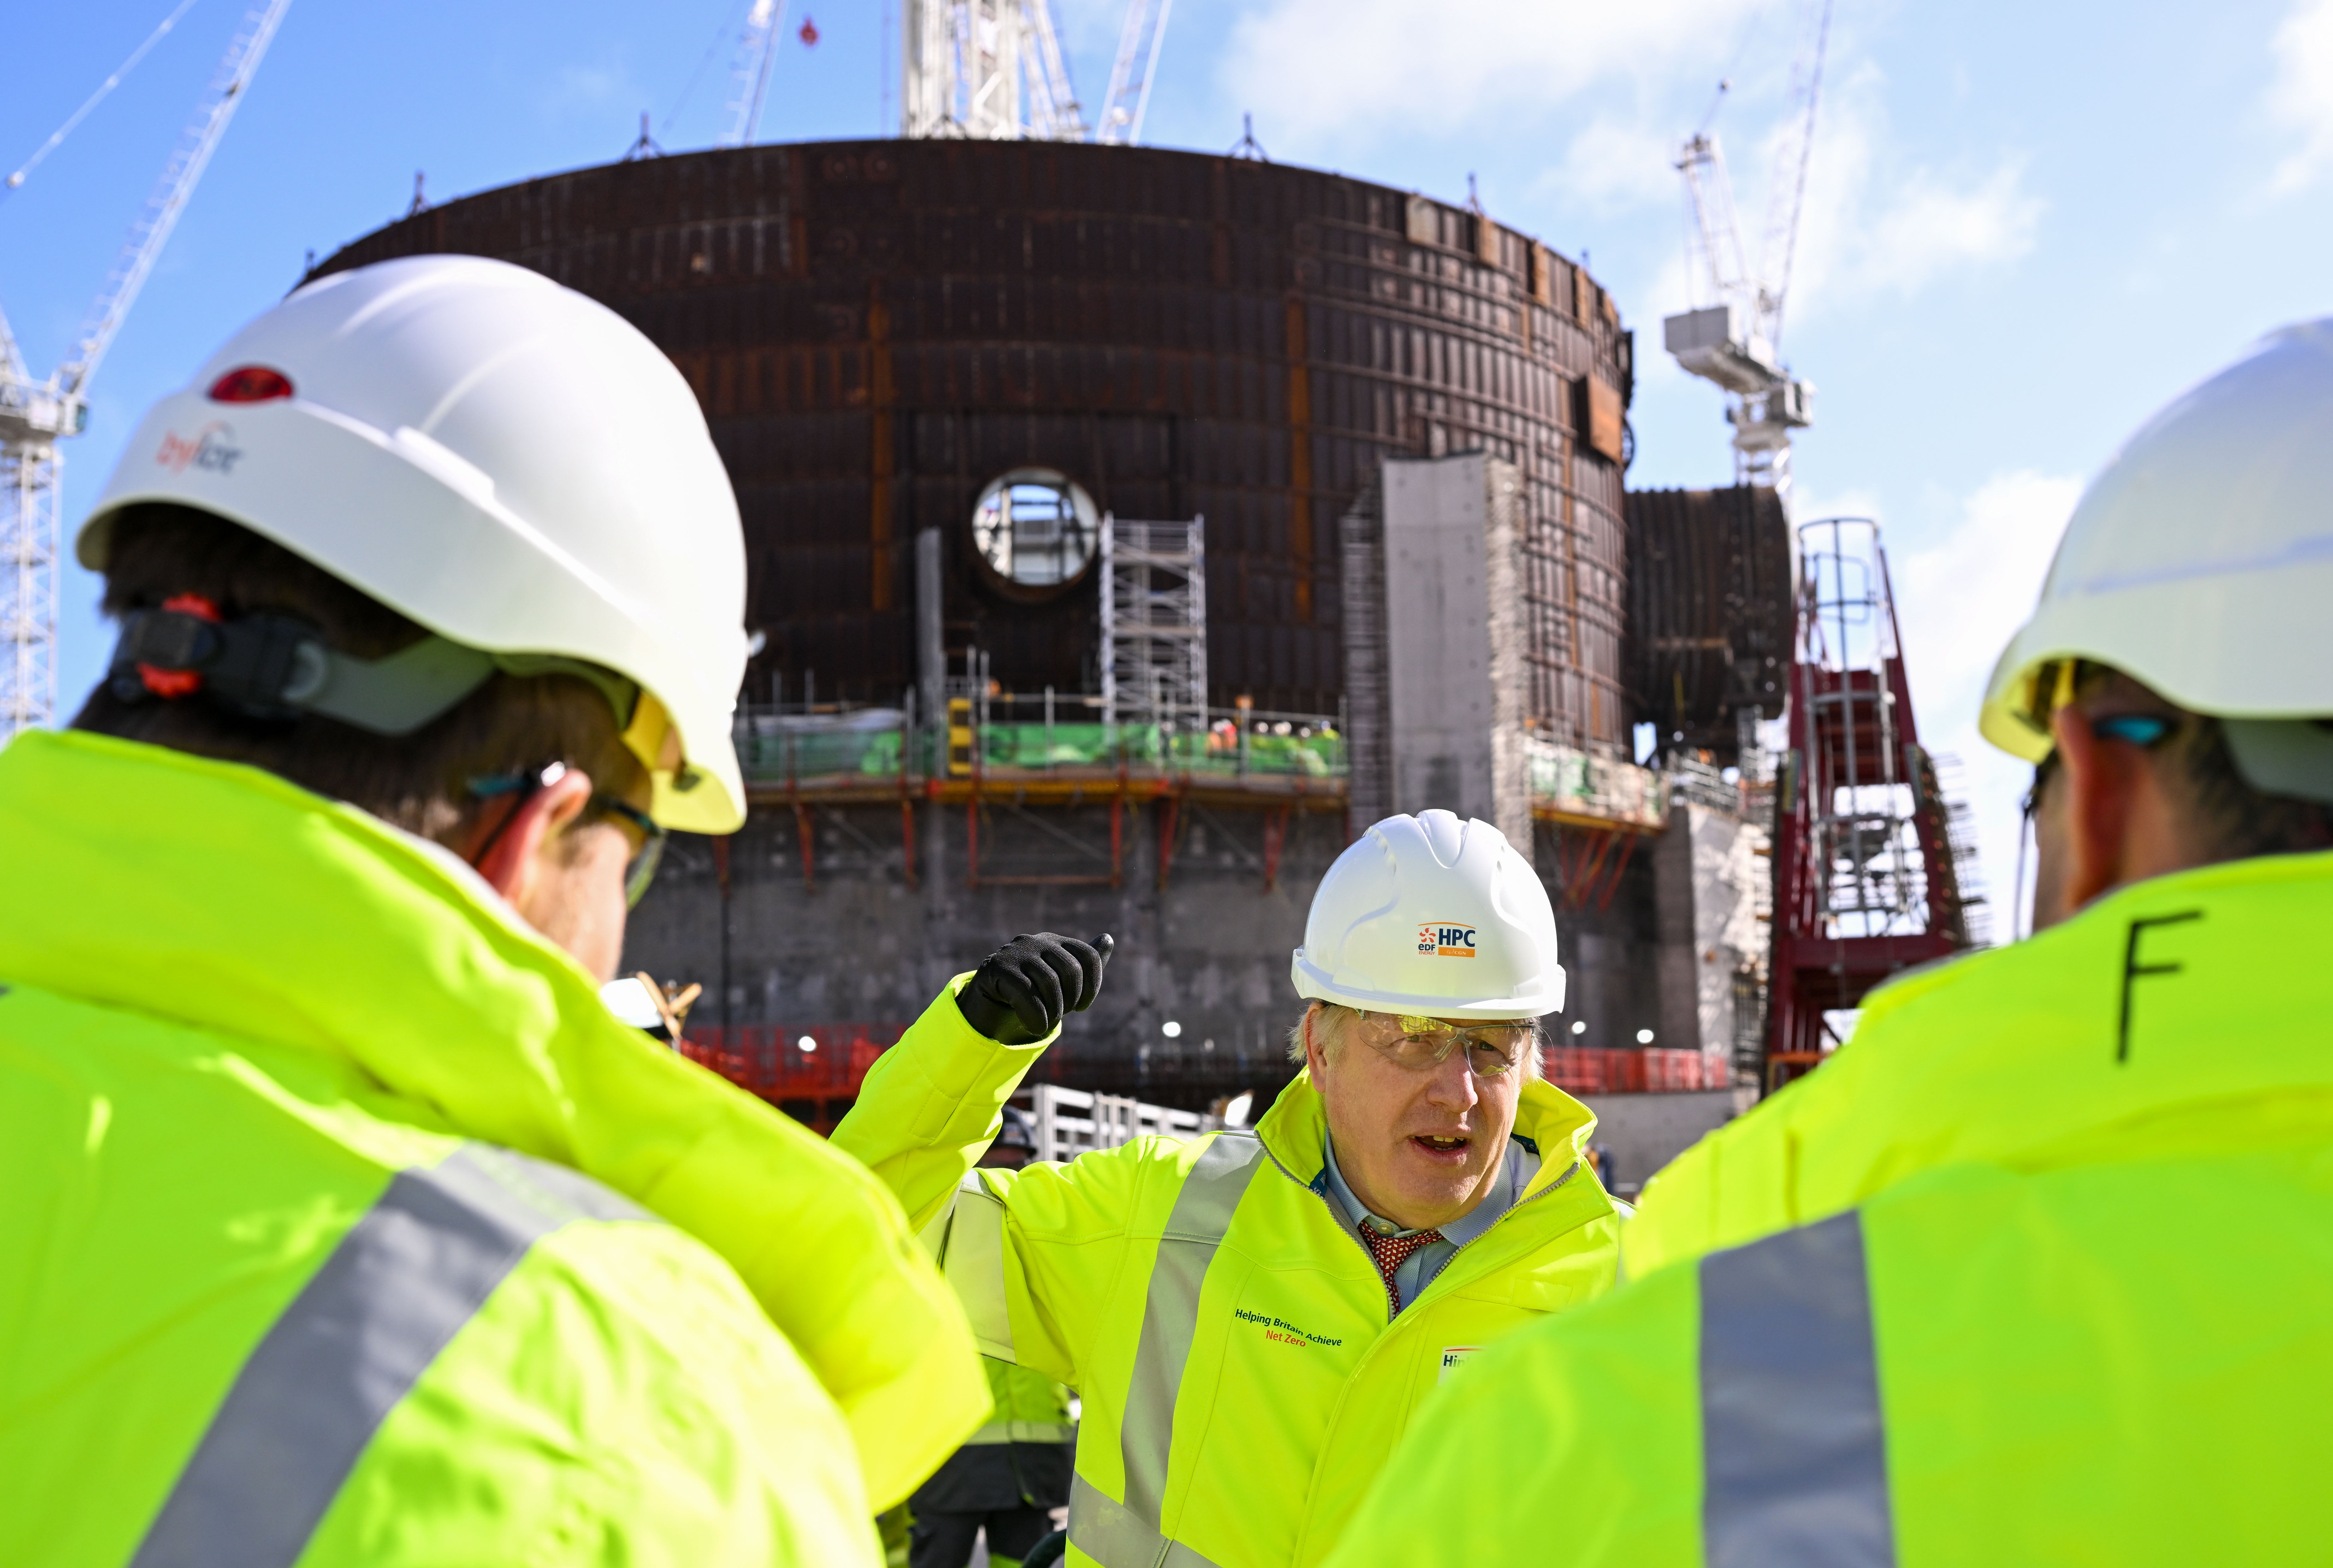 According to the Nuclear Decommissioning Agency’s latest report, the cost for ‘cleaning up’ Britain’s closing nuclear power stations, has soared to more than £132bn